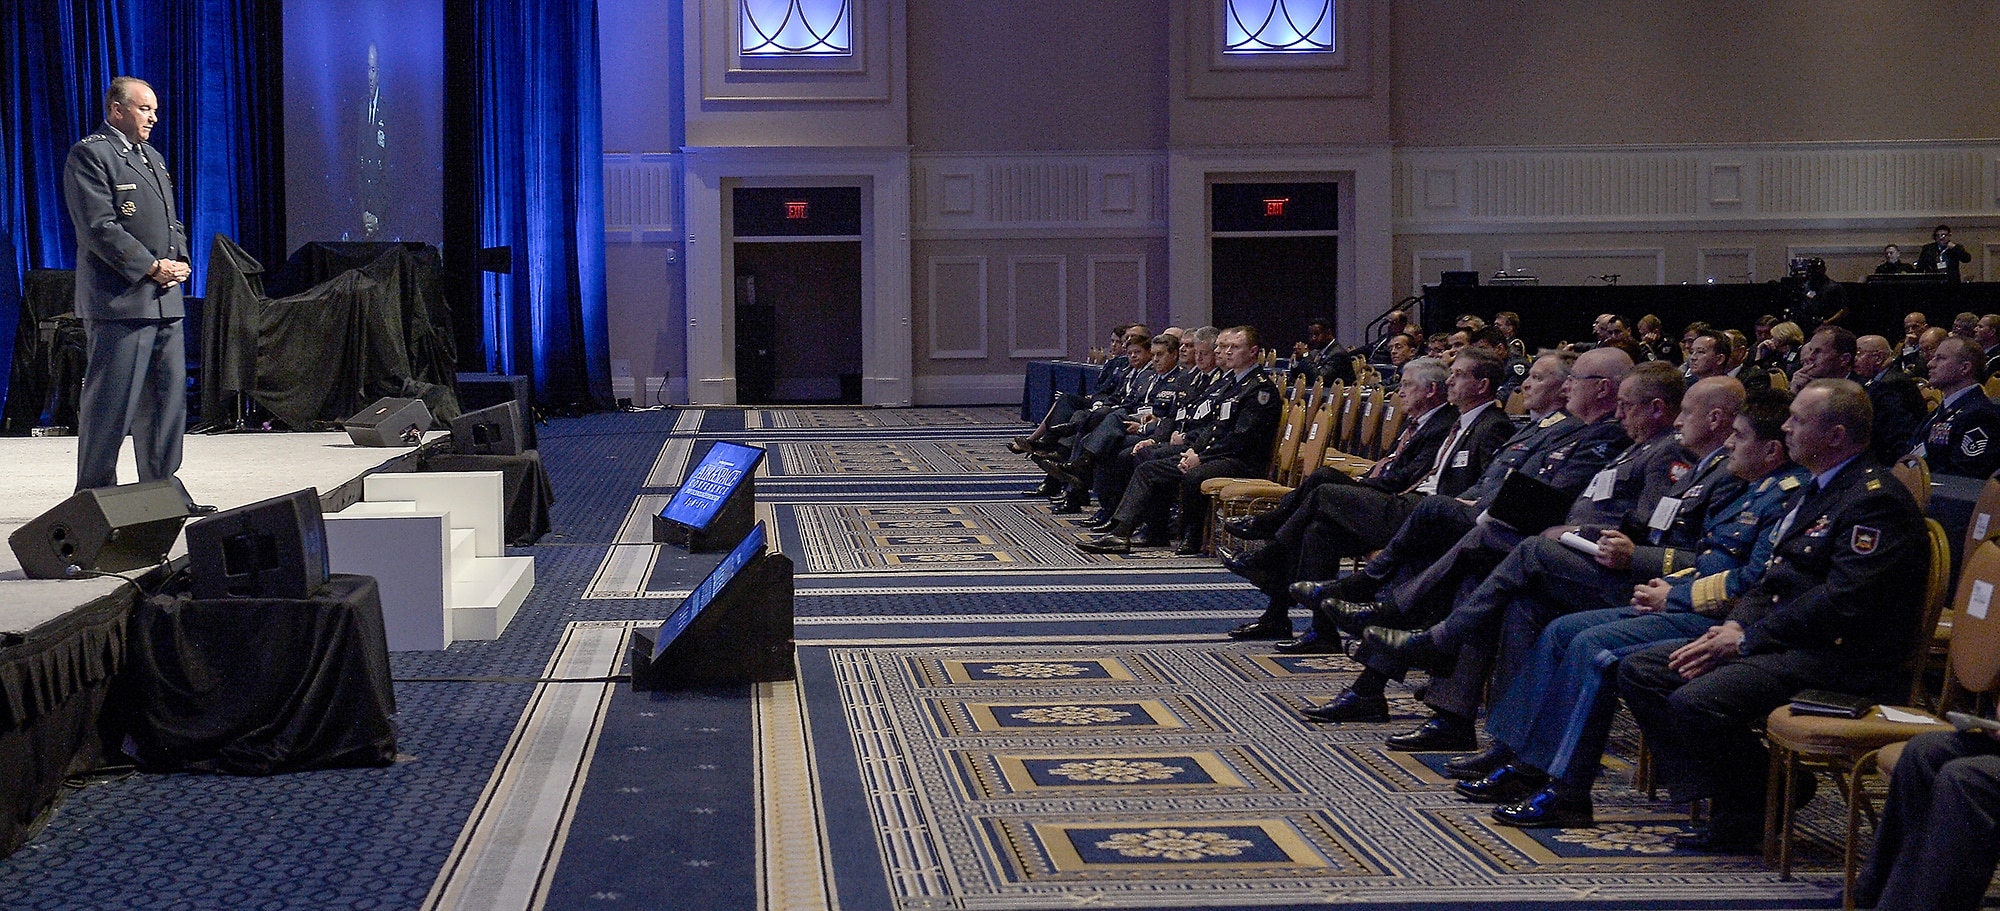 Gen. Phillip Breedlove informs the assembled crowd about the results of the recent NATO Summit and the areas of instability that affect Europe that have regional implications. Seated in the front row are the NATO air chiefs who are participating in the 2014 Air Force Association's Air & Space Conference and Technology Exposition Sept. 15, 2014, in Washington D.C. Breedlove is NATO's supreme allied commander. (U.S. Air  Force photo/Michael J. Pausic)